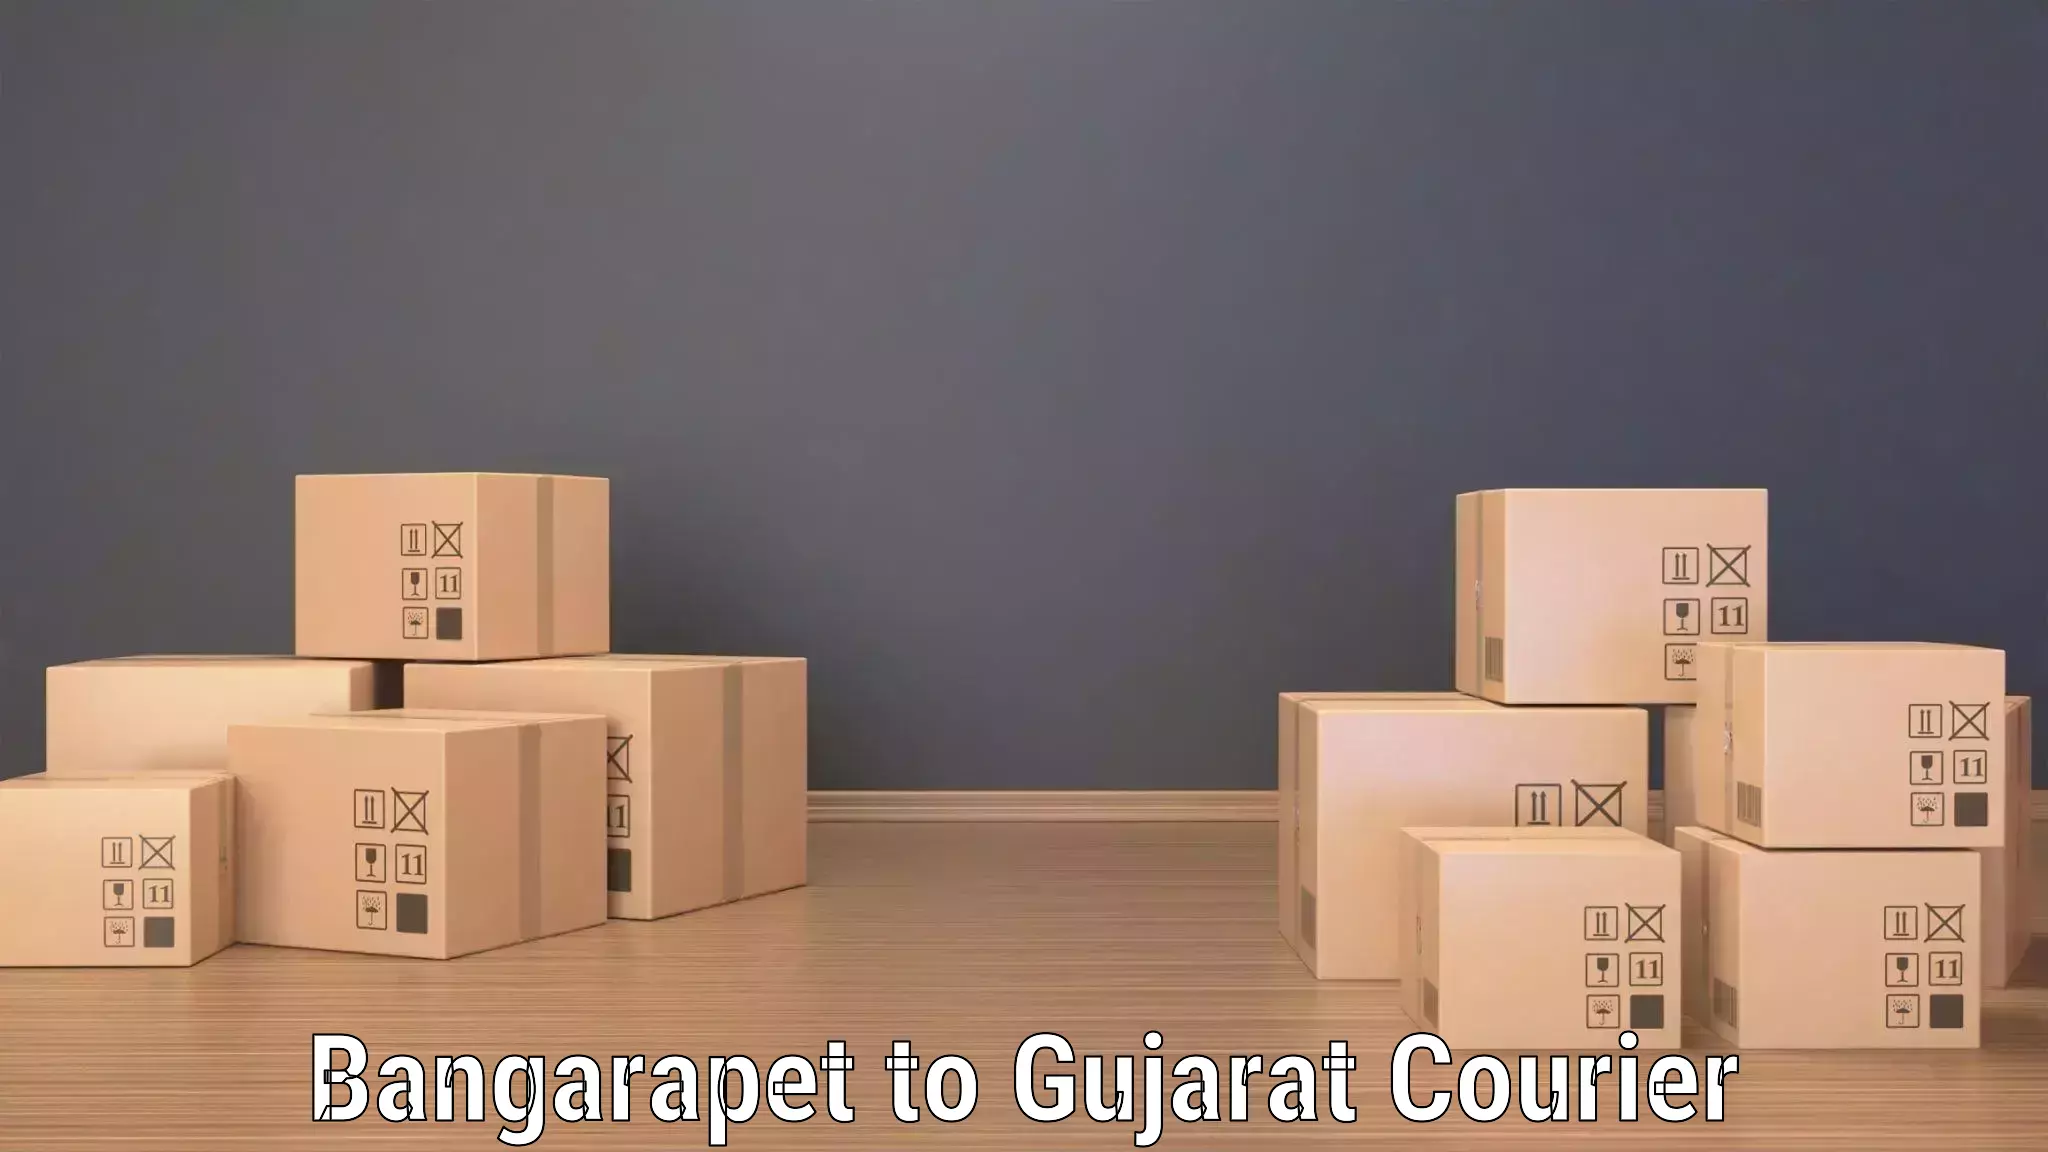 State-of-the-art courier technology Bangarapet to Morbi